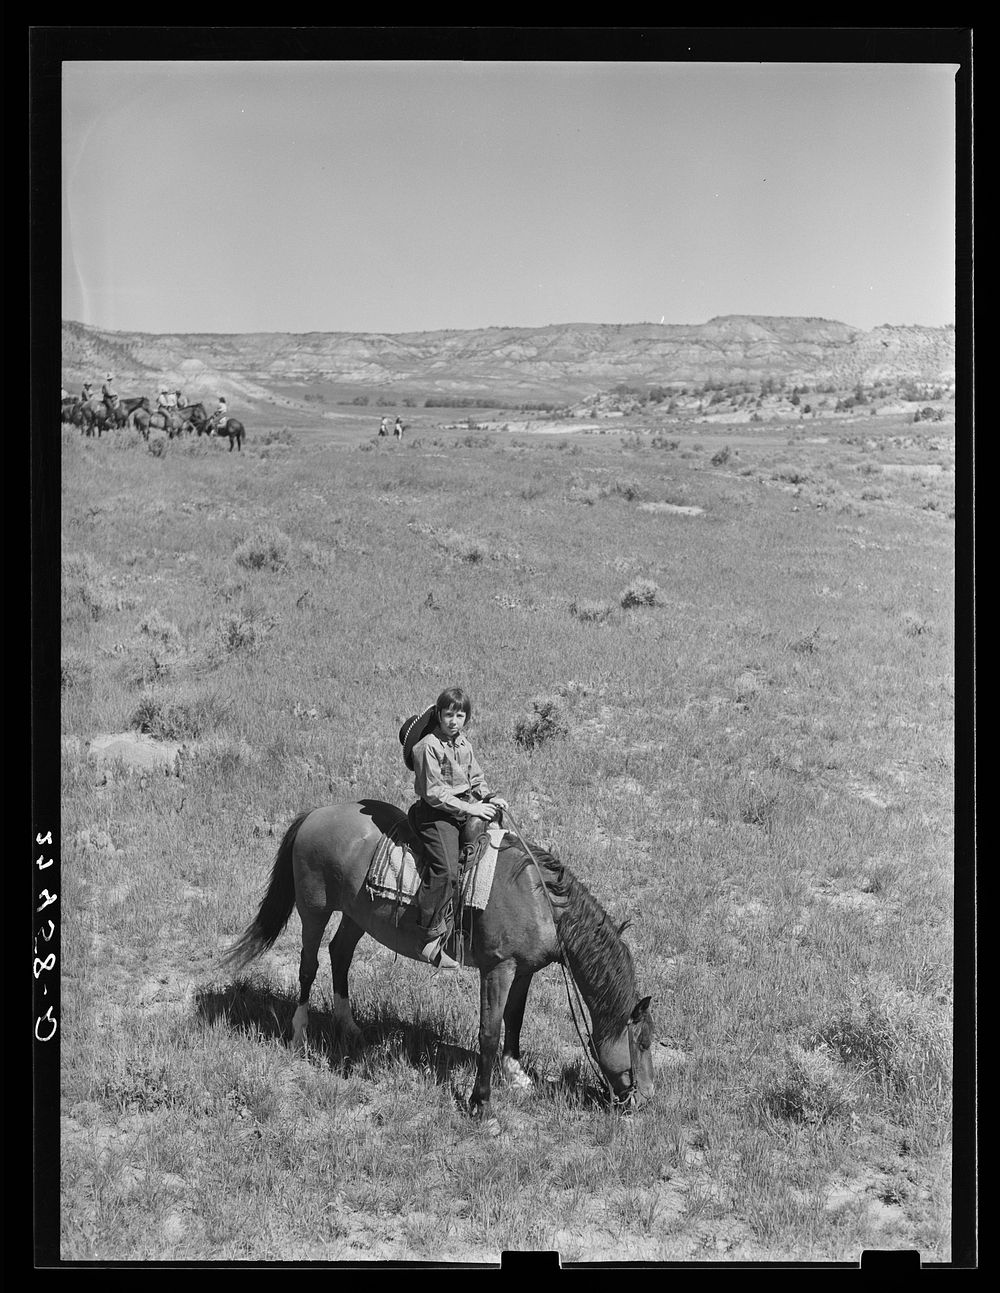 Dude girl. Quarter Circle 'U' Ranch, Montana. Sourced from the Library of Congress.